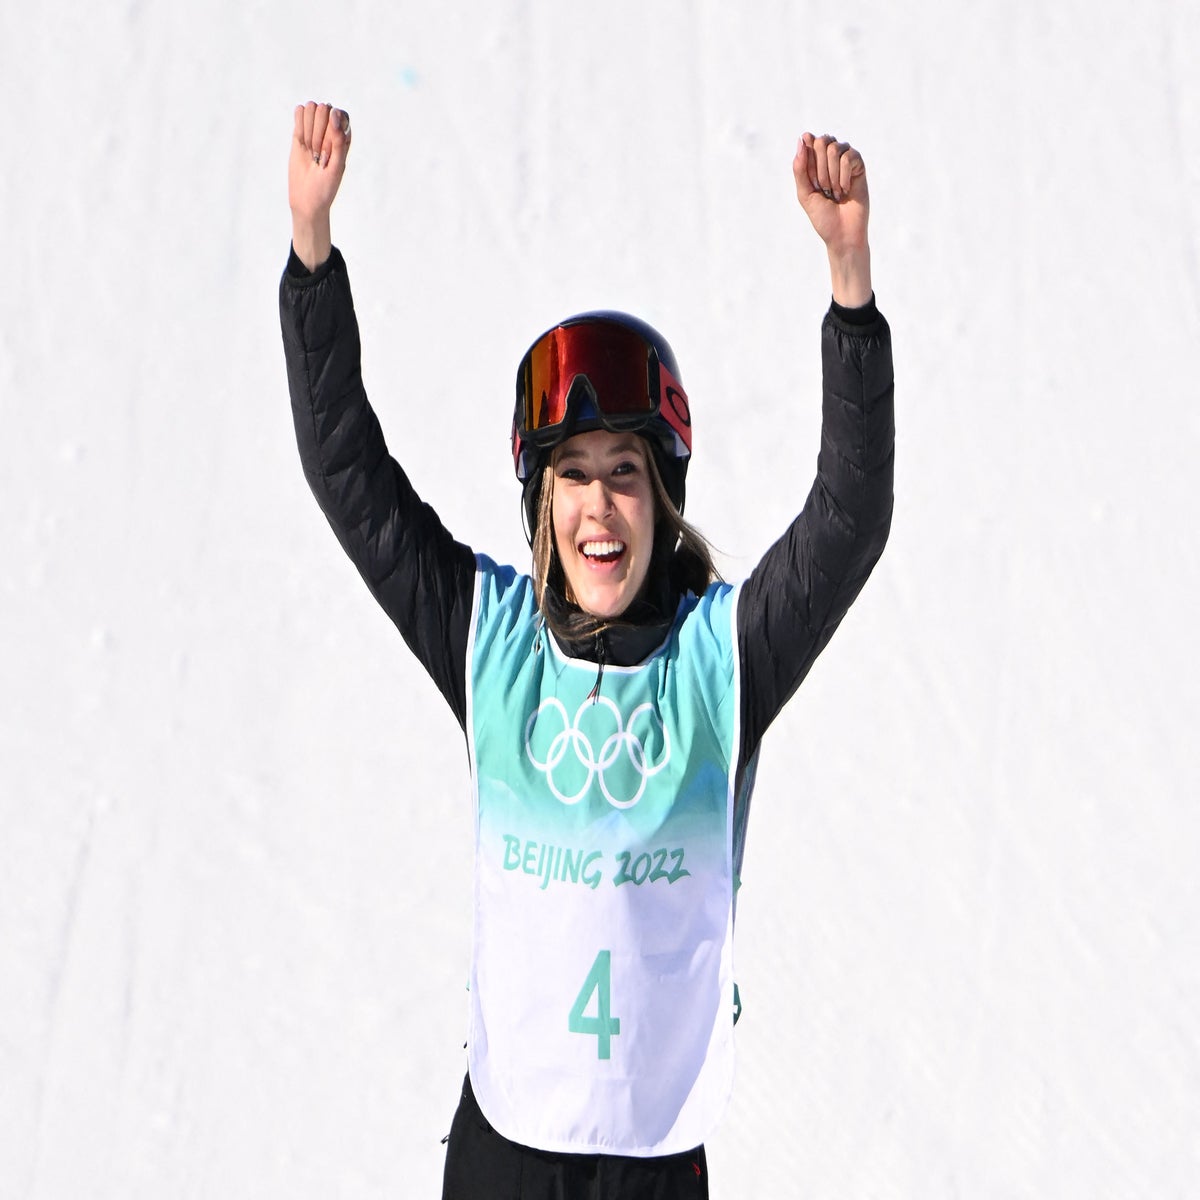 Olympic Winter Games: Eileen Gu: A star in China, dubbed a